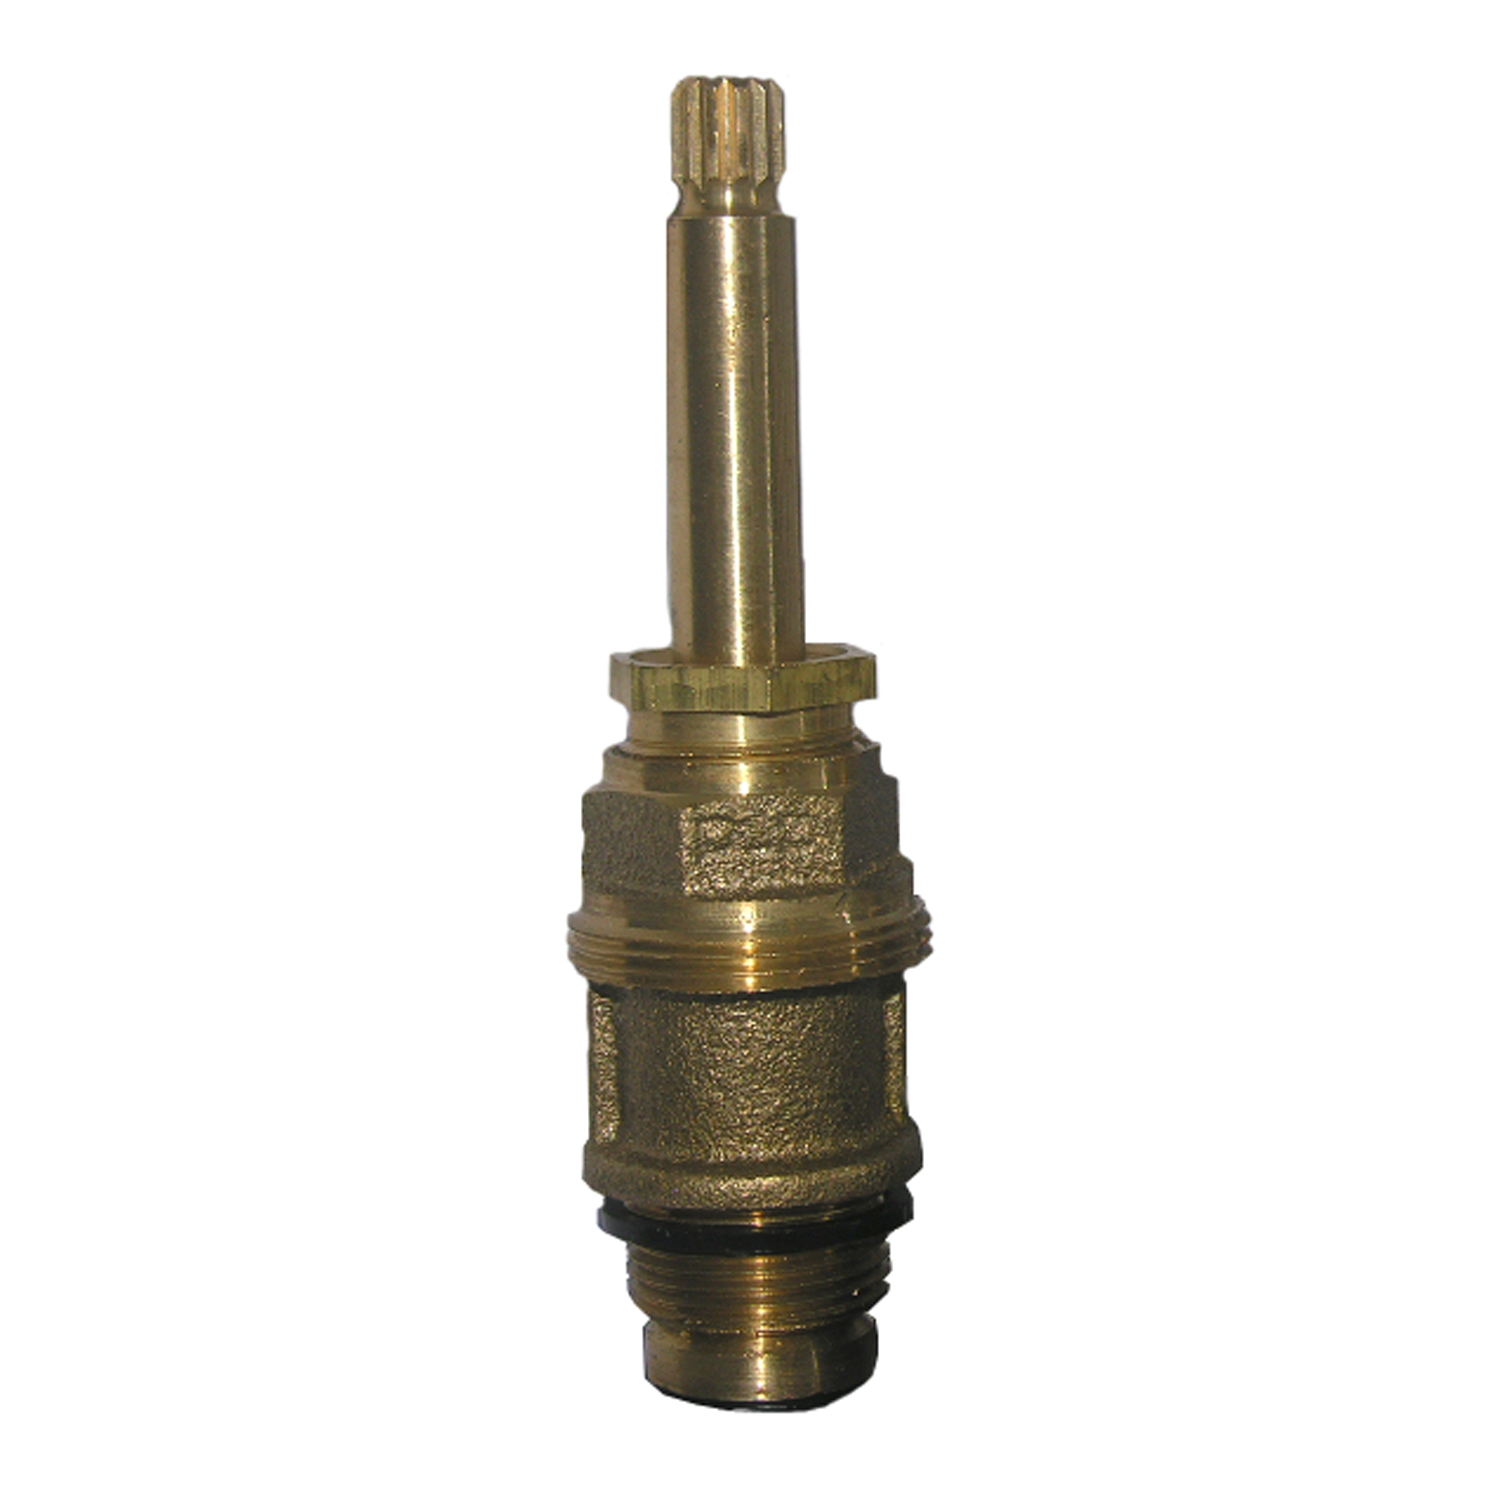 Lasco S-804-3 Cold/Hot Faucet Stem, Brass, For: 5043 Price Pfister Tub and Shower Faucets